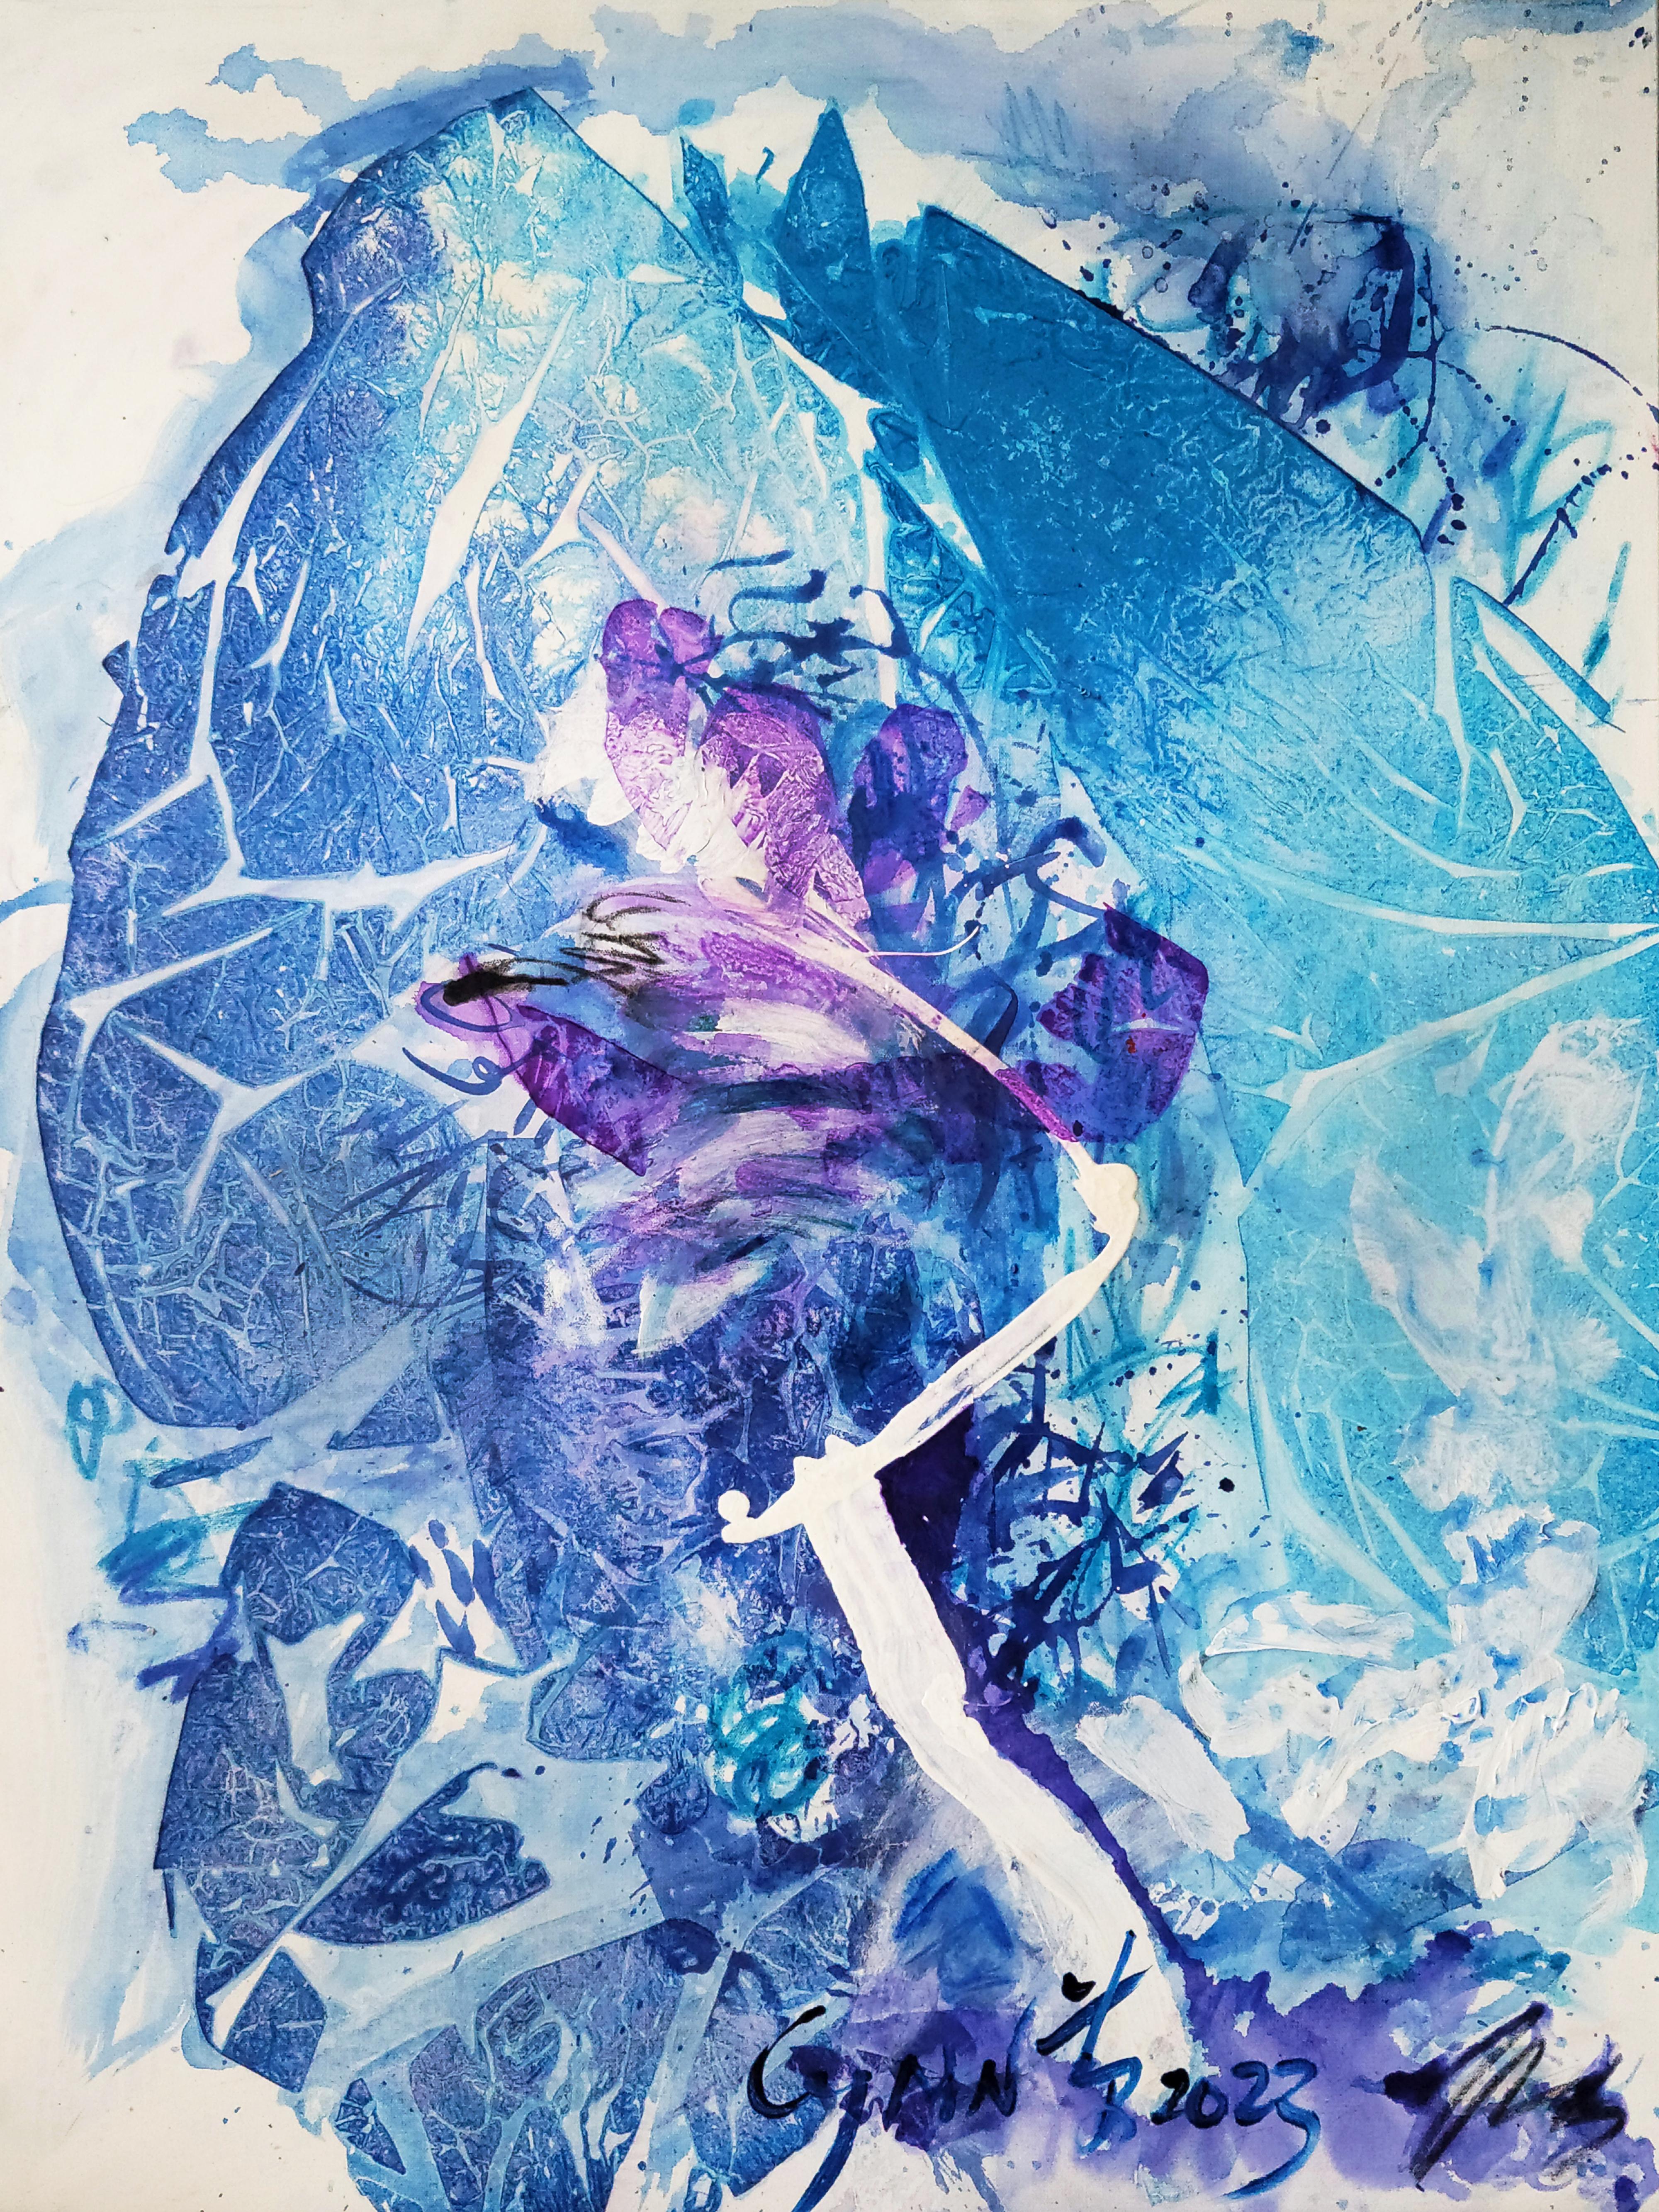 Solitary Blossom – Fresh, Lyrical, Expressive Abstract, Zen Calligraphy - Painting by Cymn Wong 